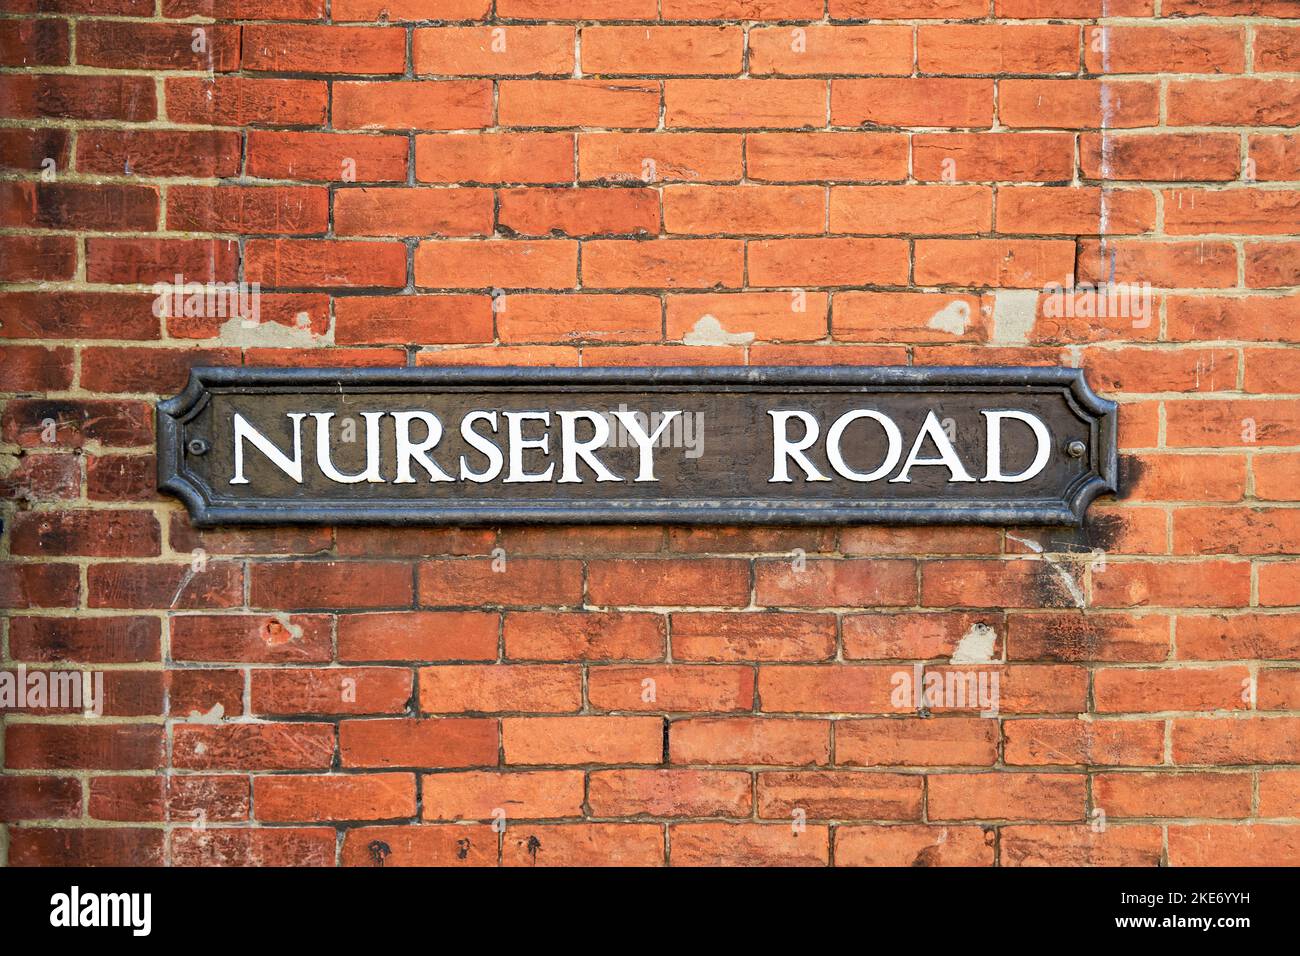 Nursery road street name sign on red brick wall Stock Photo